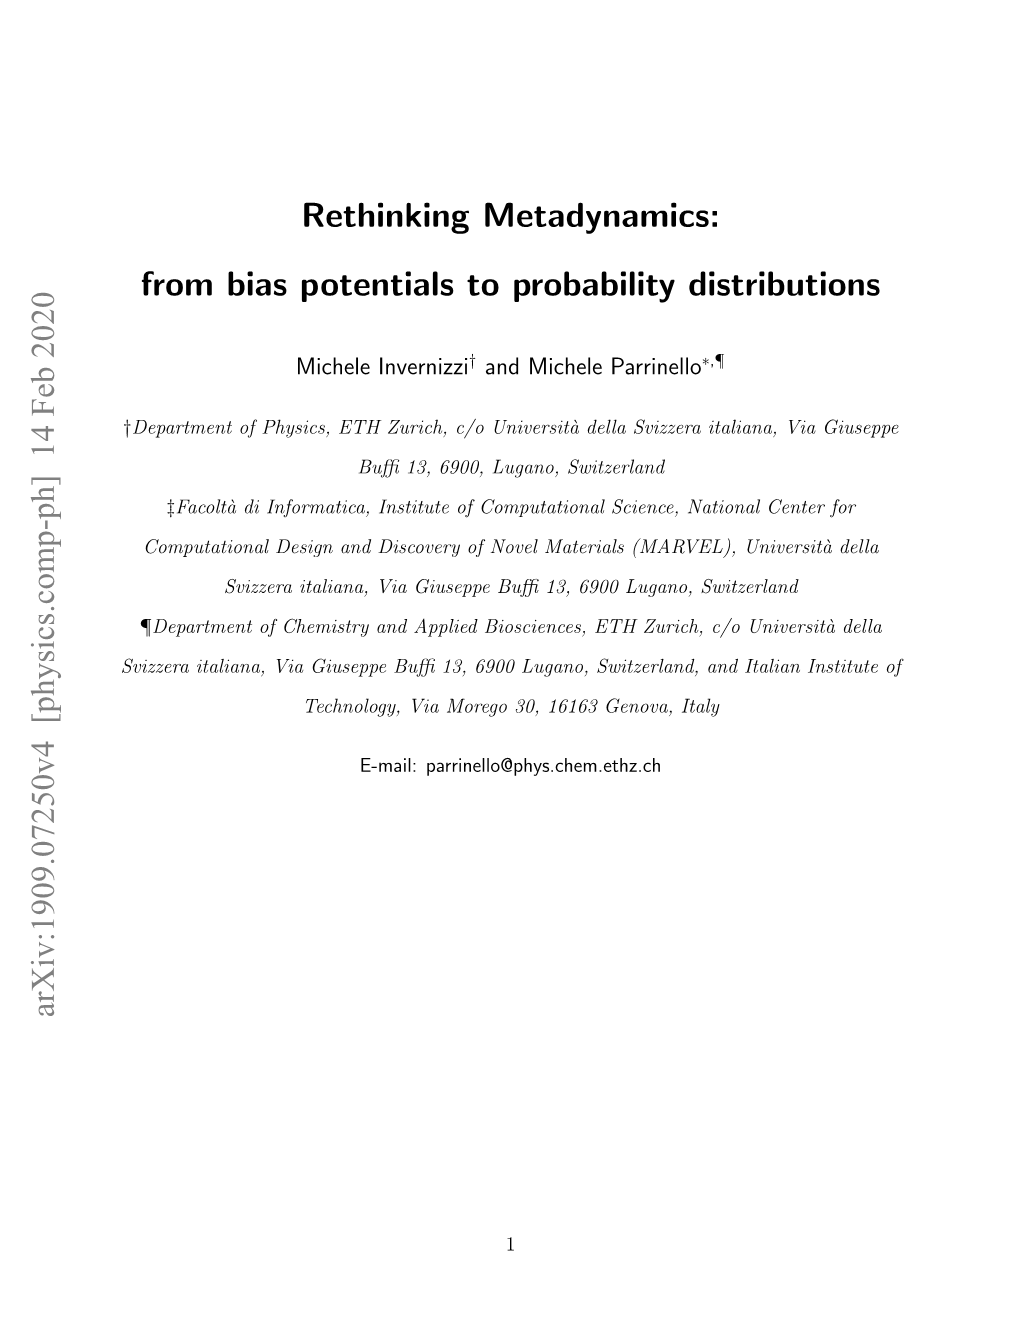 Rethinking Metadynamics: from Bias Potentials to Probability Distributions